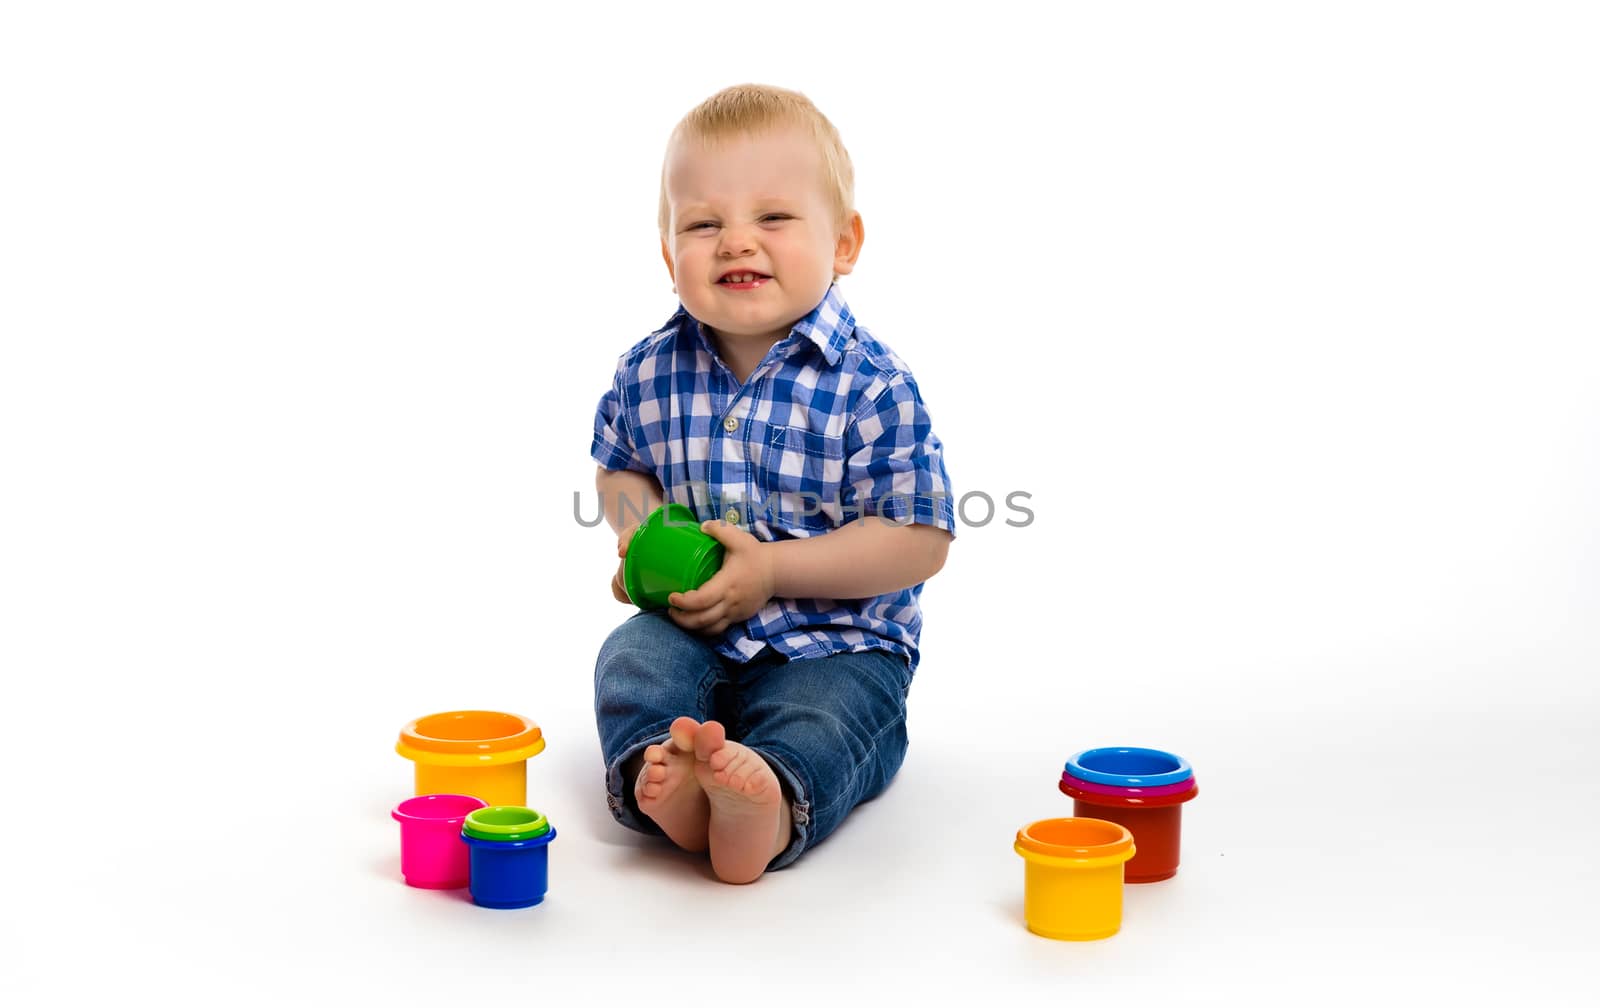 Happy baby boy in a plaid shirt with toys. studio